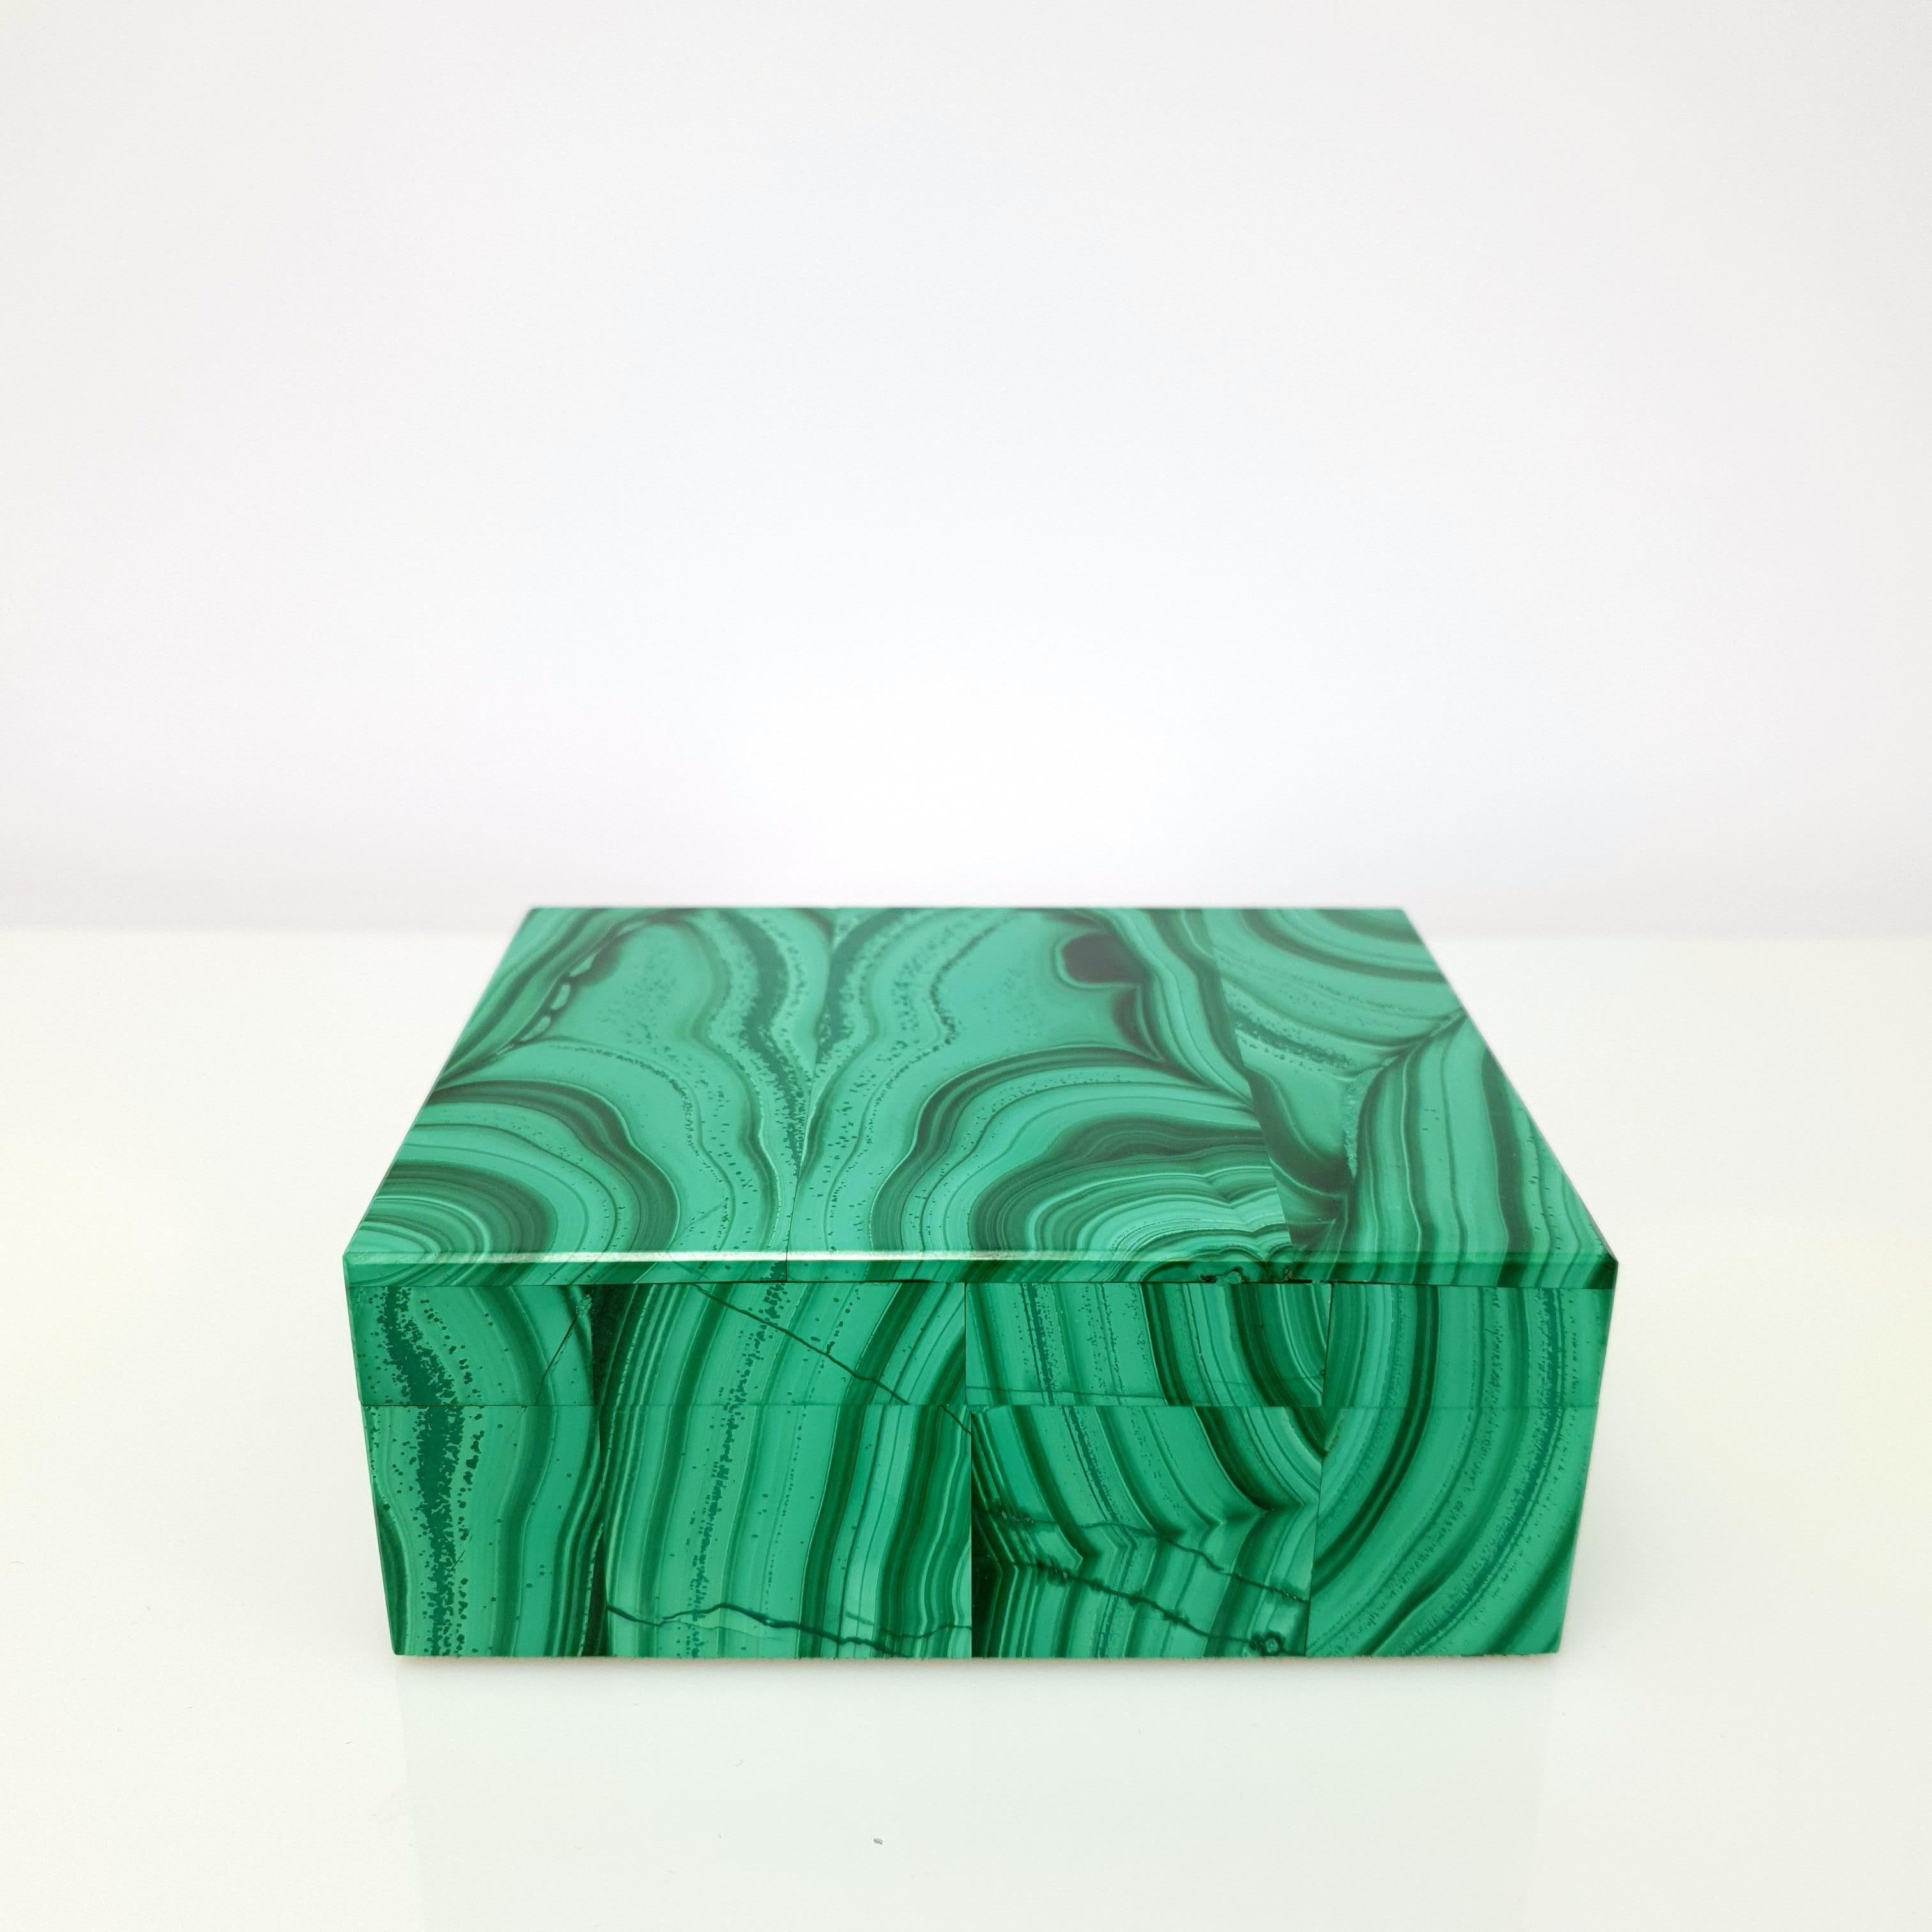 A Natural Handmade Malachite Decorative Jewelry Box.
The pattern looks like an artful painting of nature. The banding very fine.
The Inlay is made out of natural black Marble.
It's a great piece for decoration on a desk, vanity, or even as a special